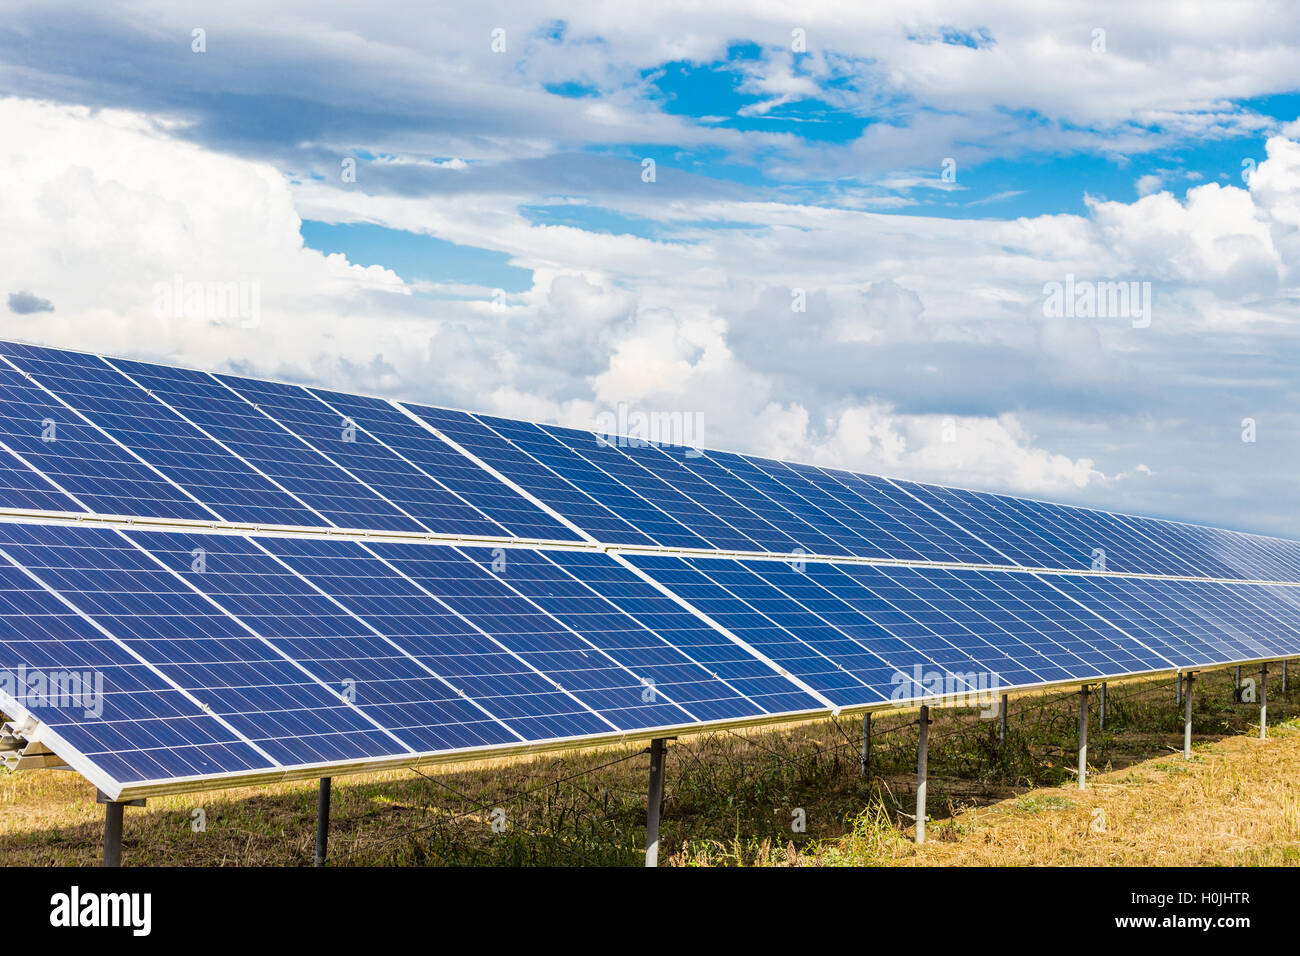 photovoltaic panels under cloudy bright blue sky Stock Photo